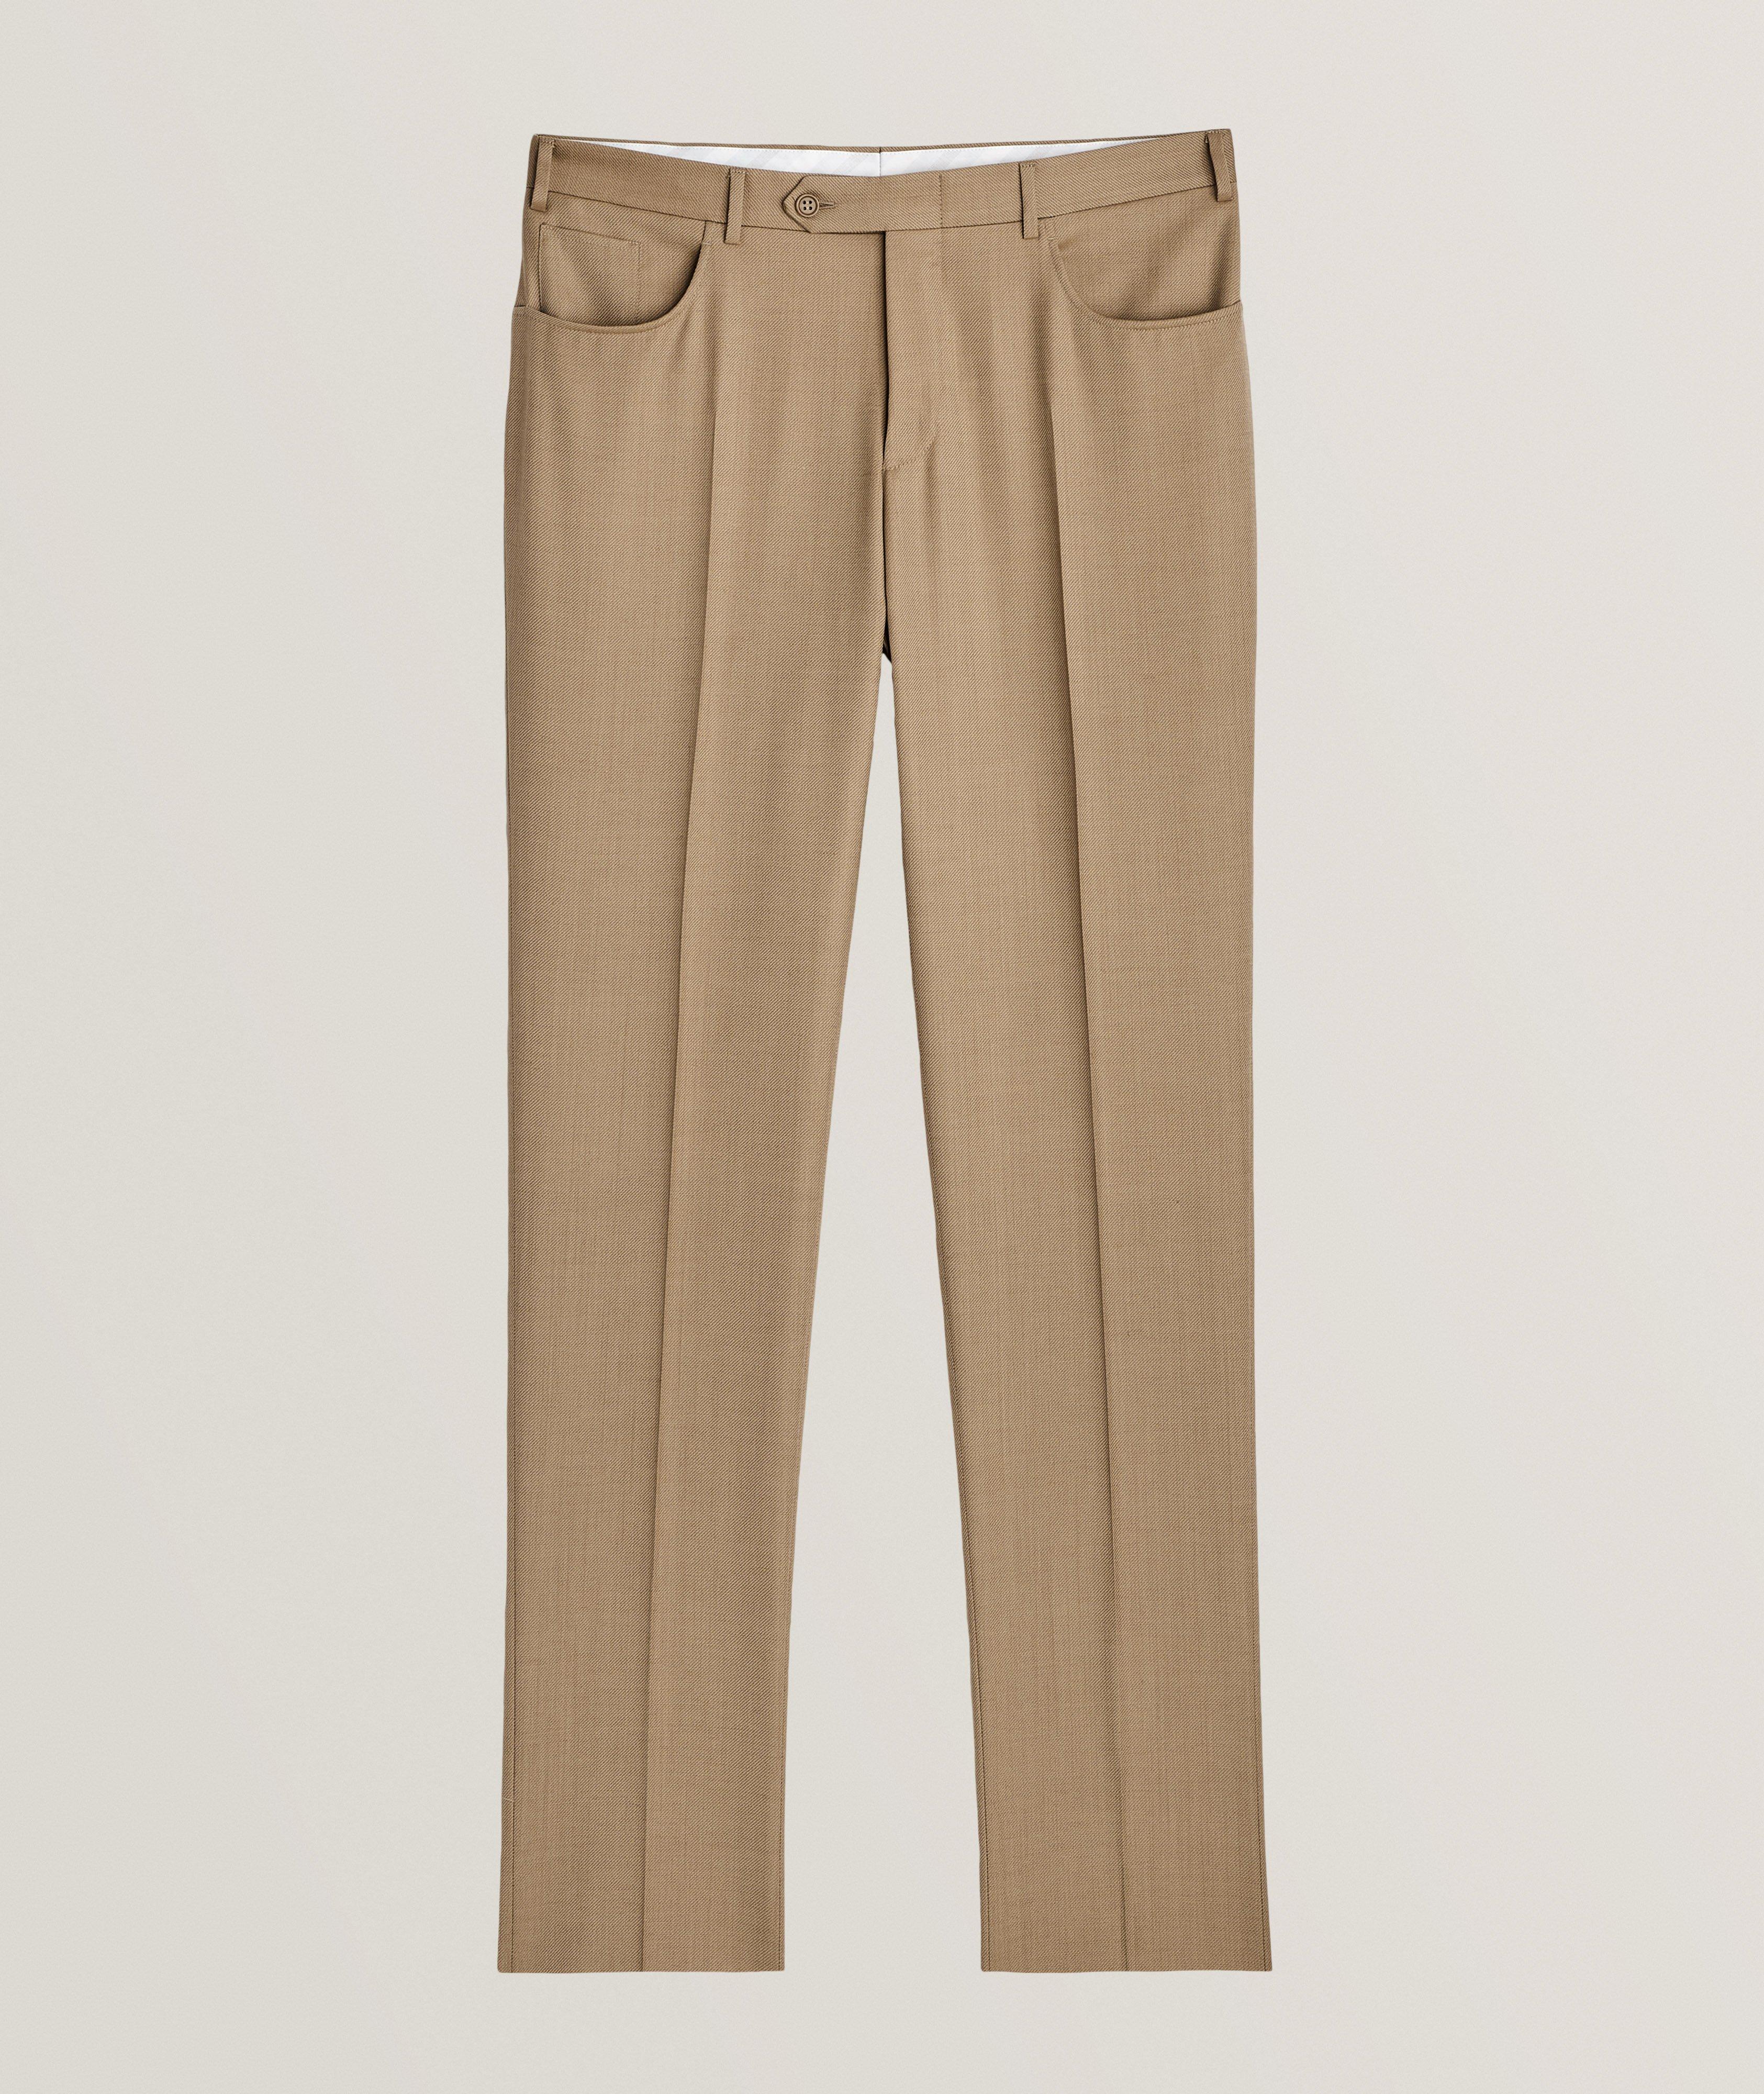 Twill Wool Trousers image 0